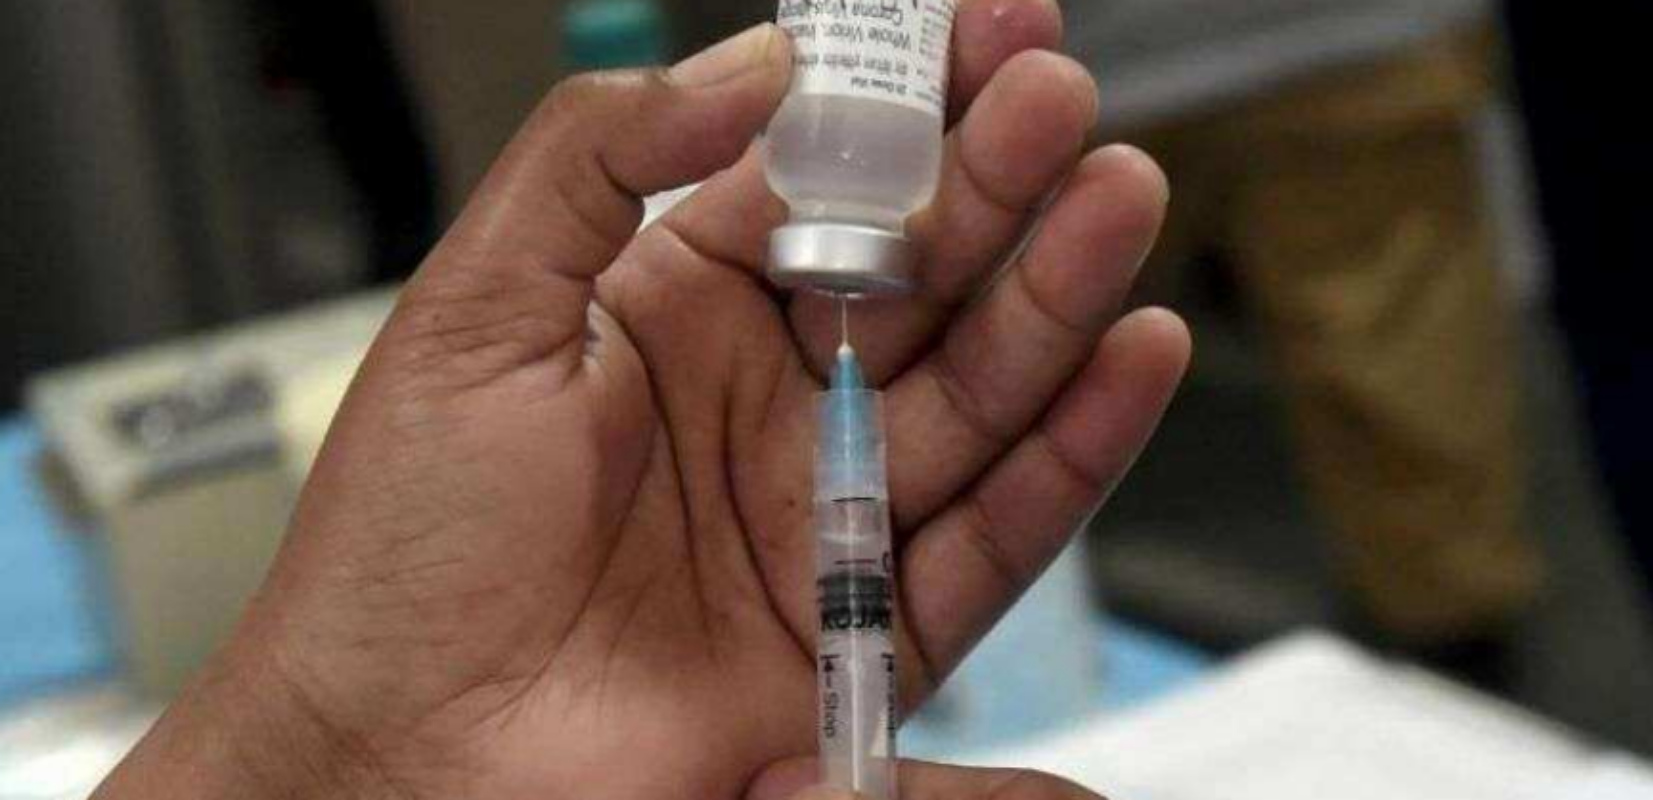 India's vaccination program: 1 in 4 Indians fully vaccinated